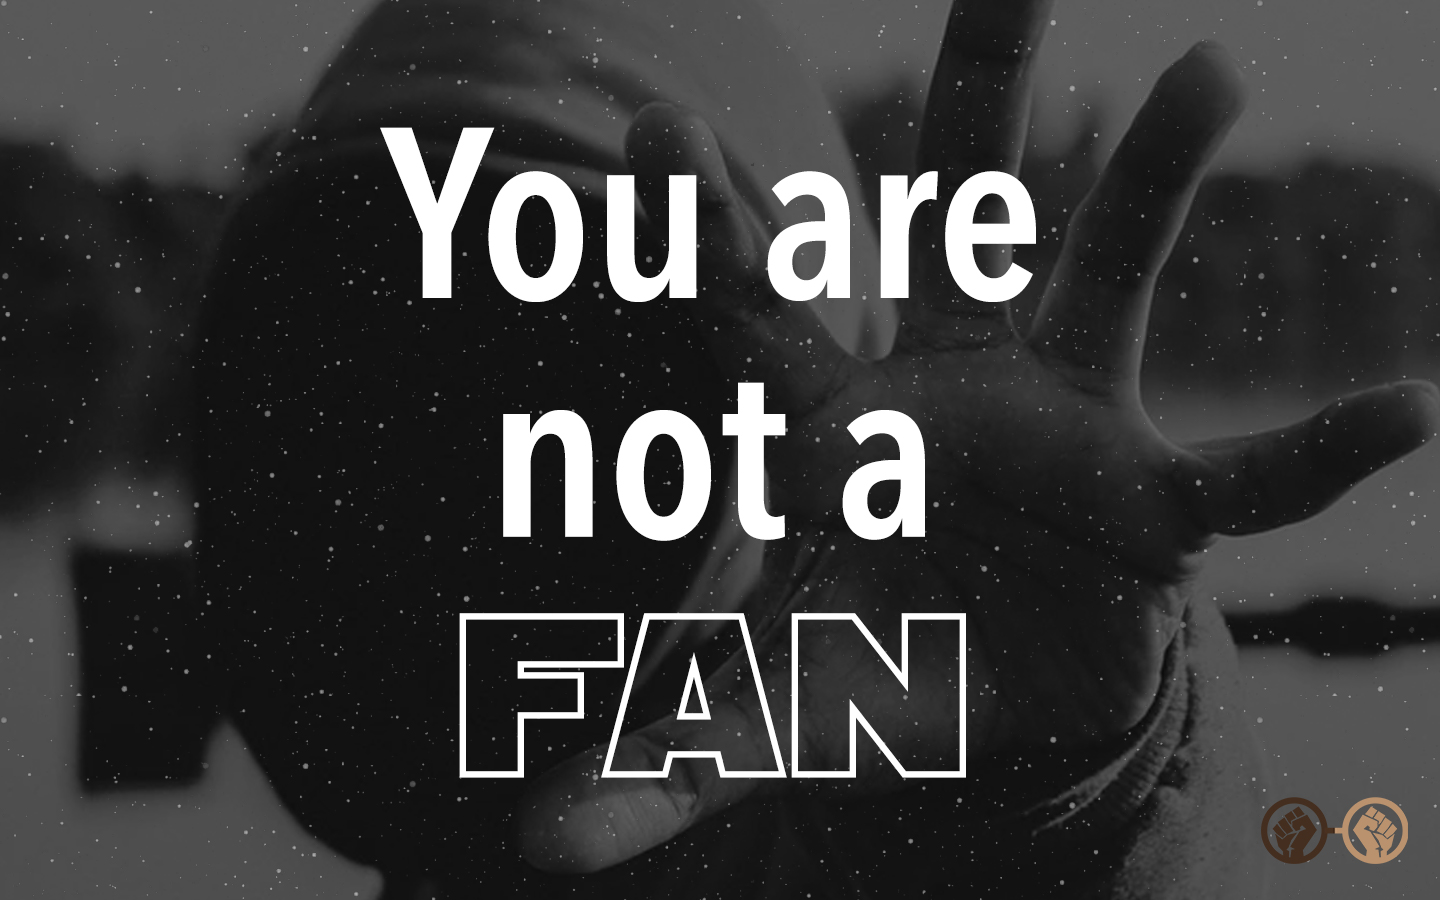 You Are Not A Fan: Addressing Toxic Nerd Culture